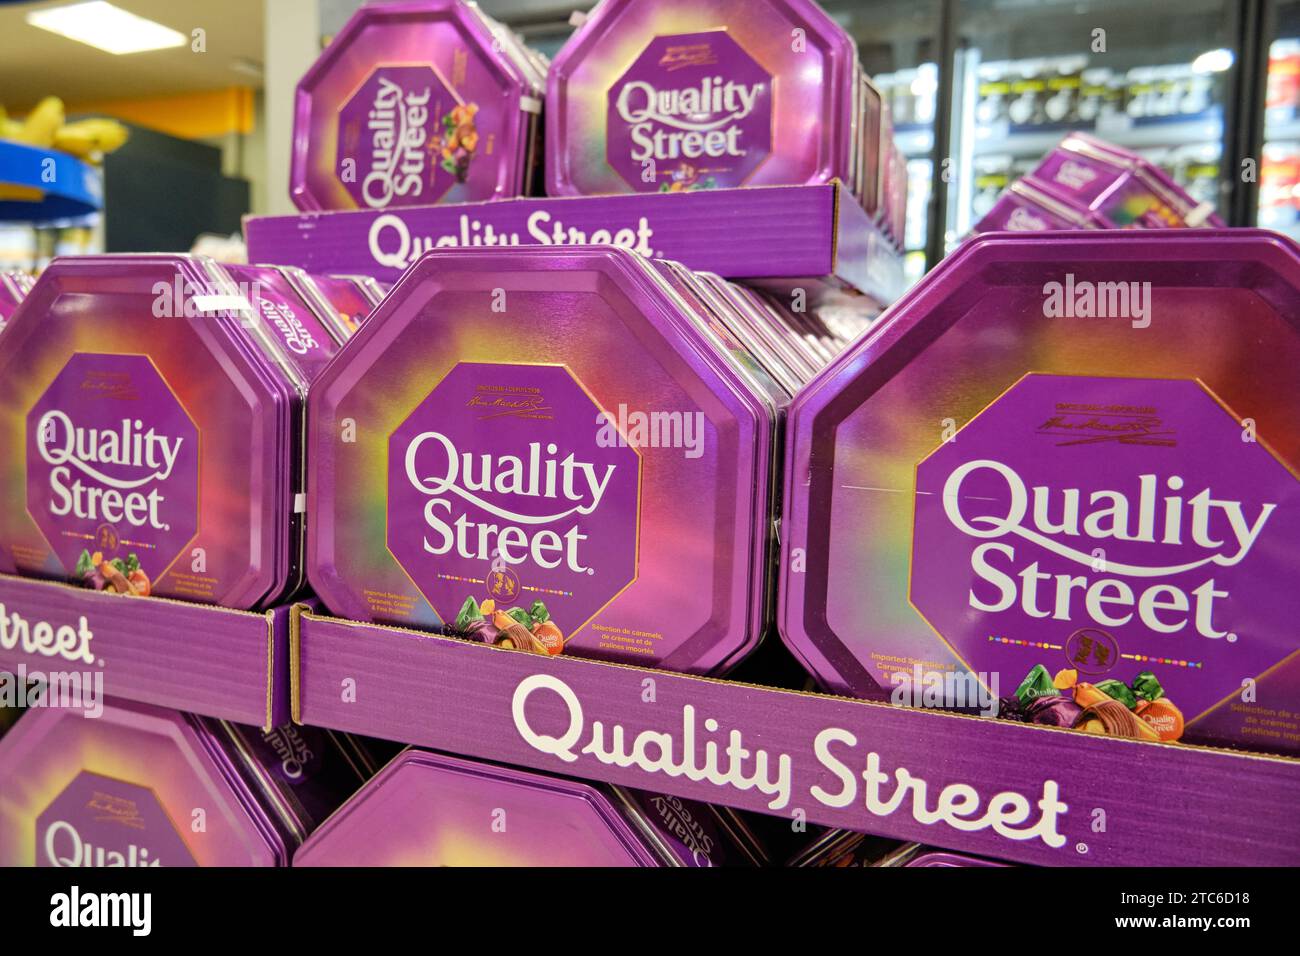 Supermarket stacked display of Quality Street chocolate boxes Stock Photo